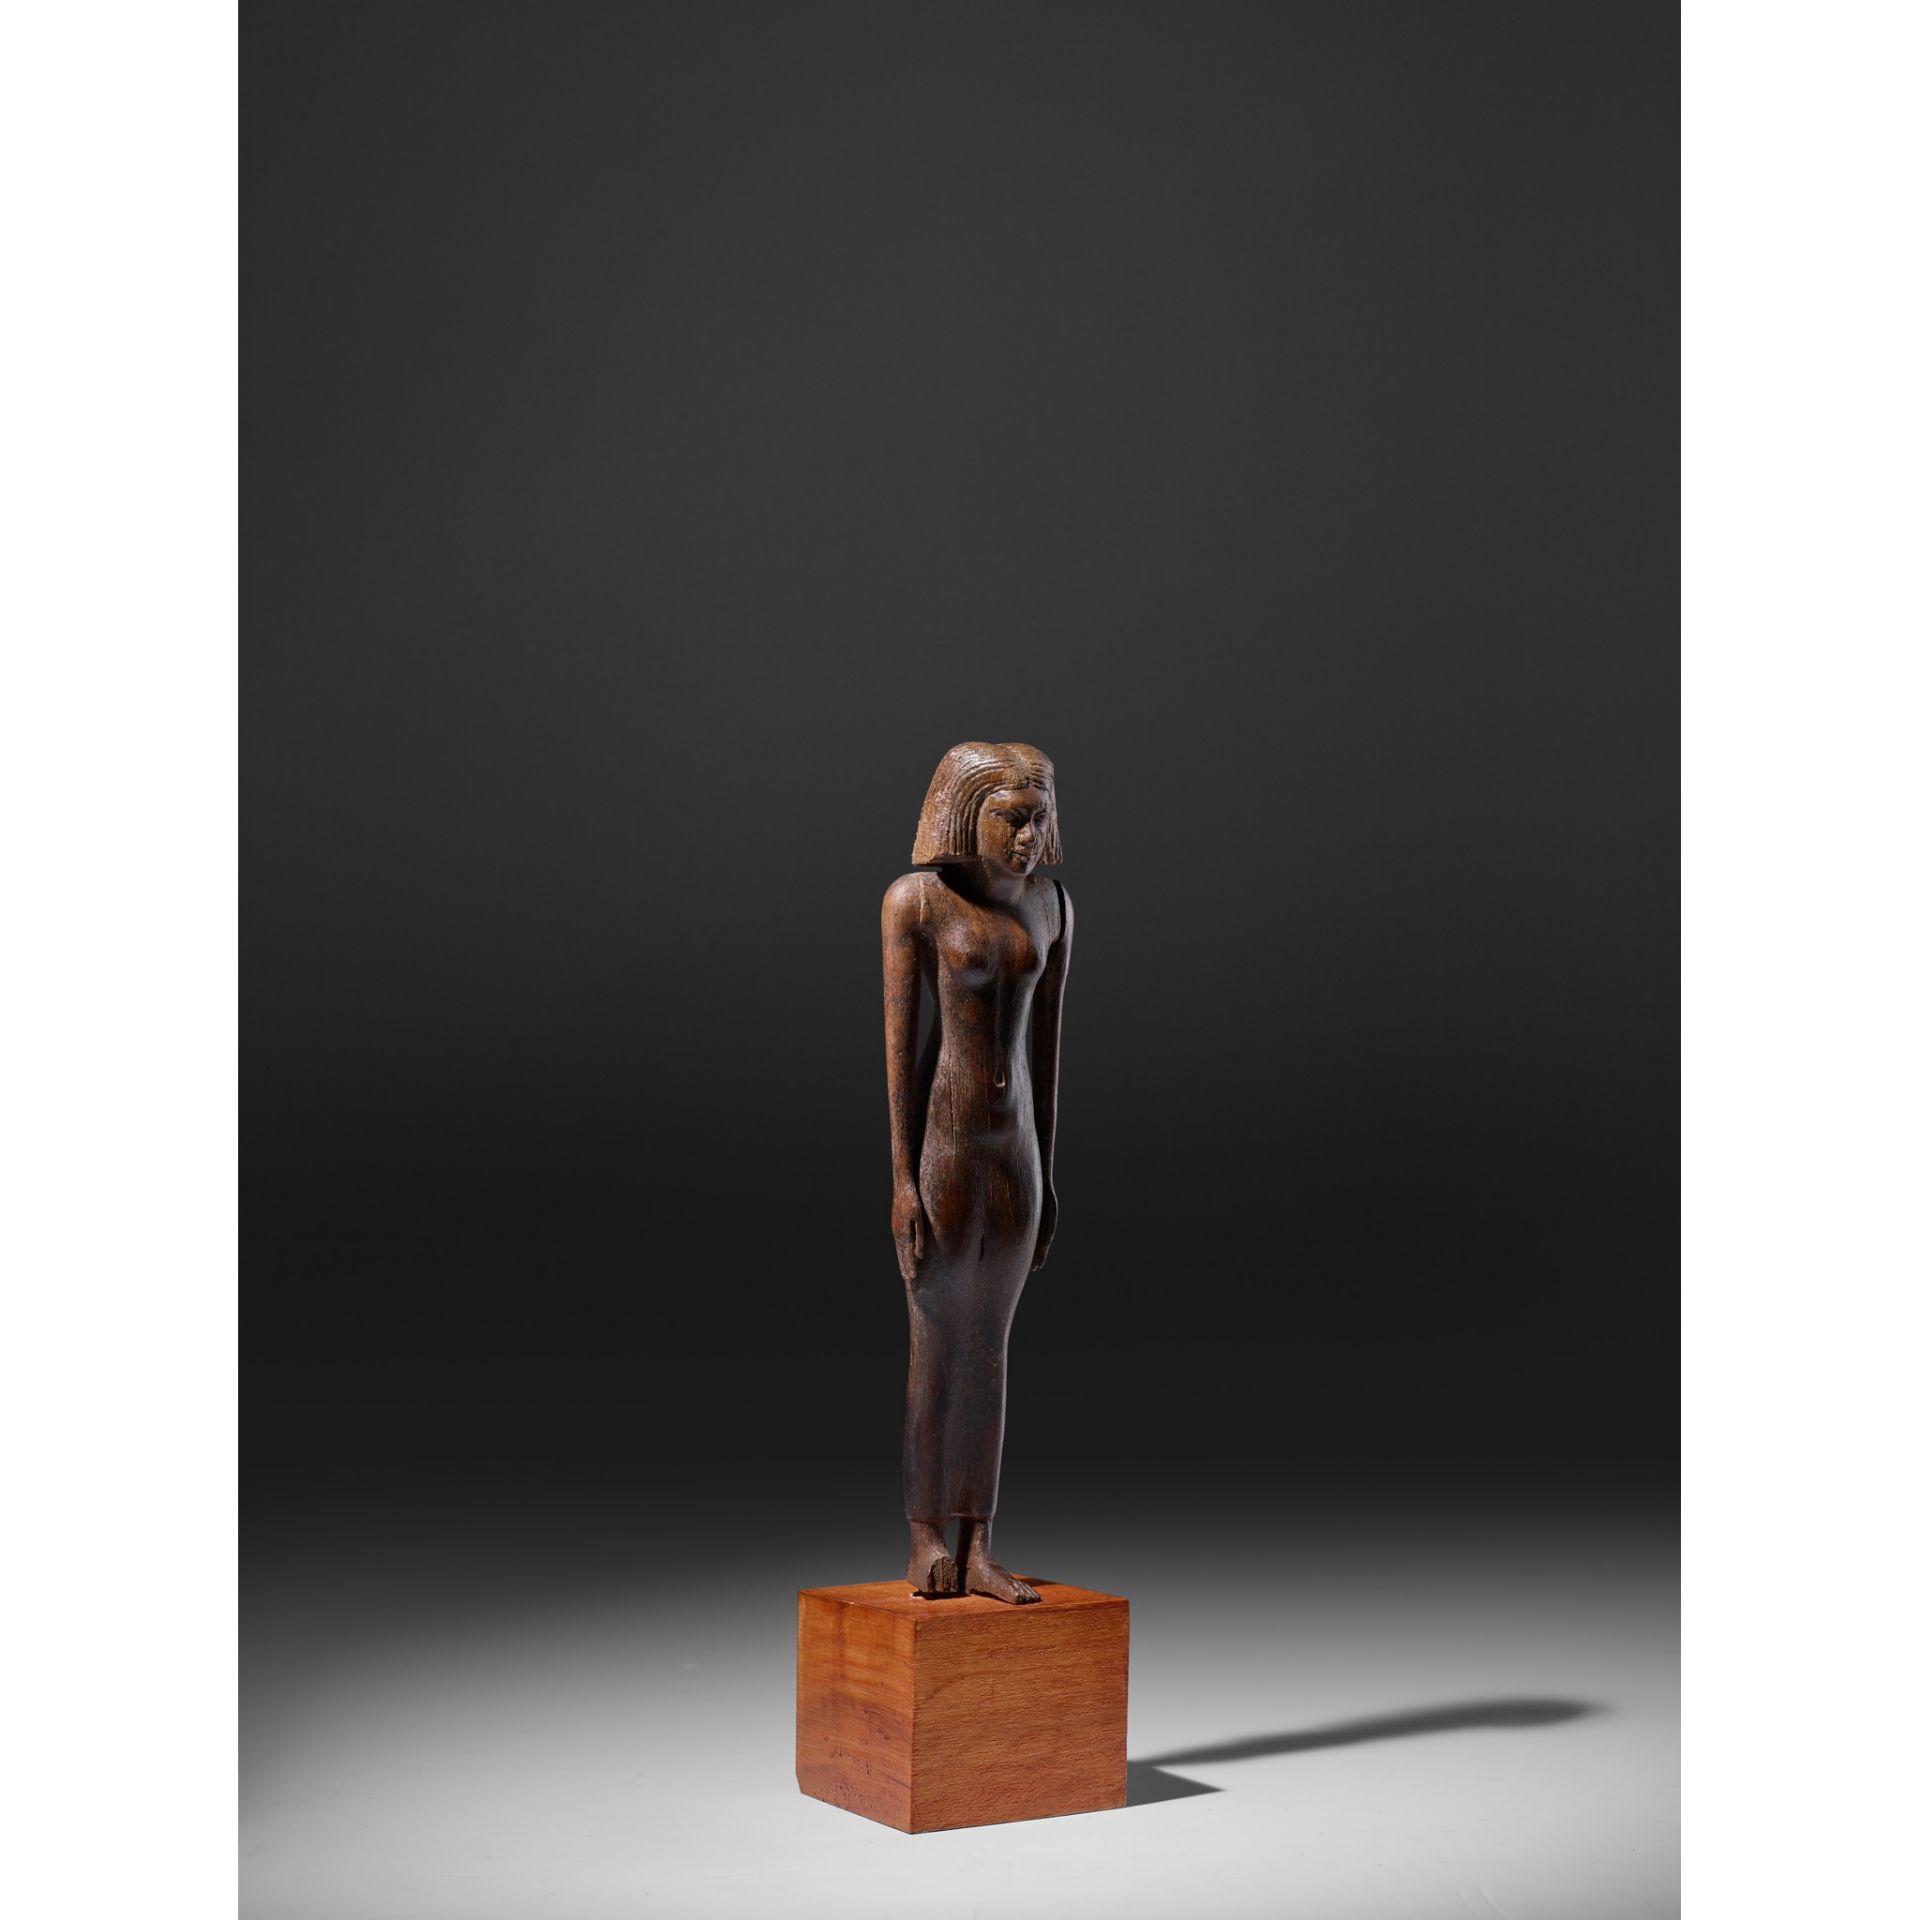 ANCIENT EGYPTIAN WOODEN FIGURE, KA EGYPT, MIDDLE KINGDOM, 12TH DYNASTY, C. 1900 B.C. - Image 2 of 3